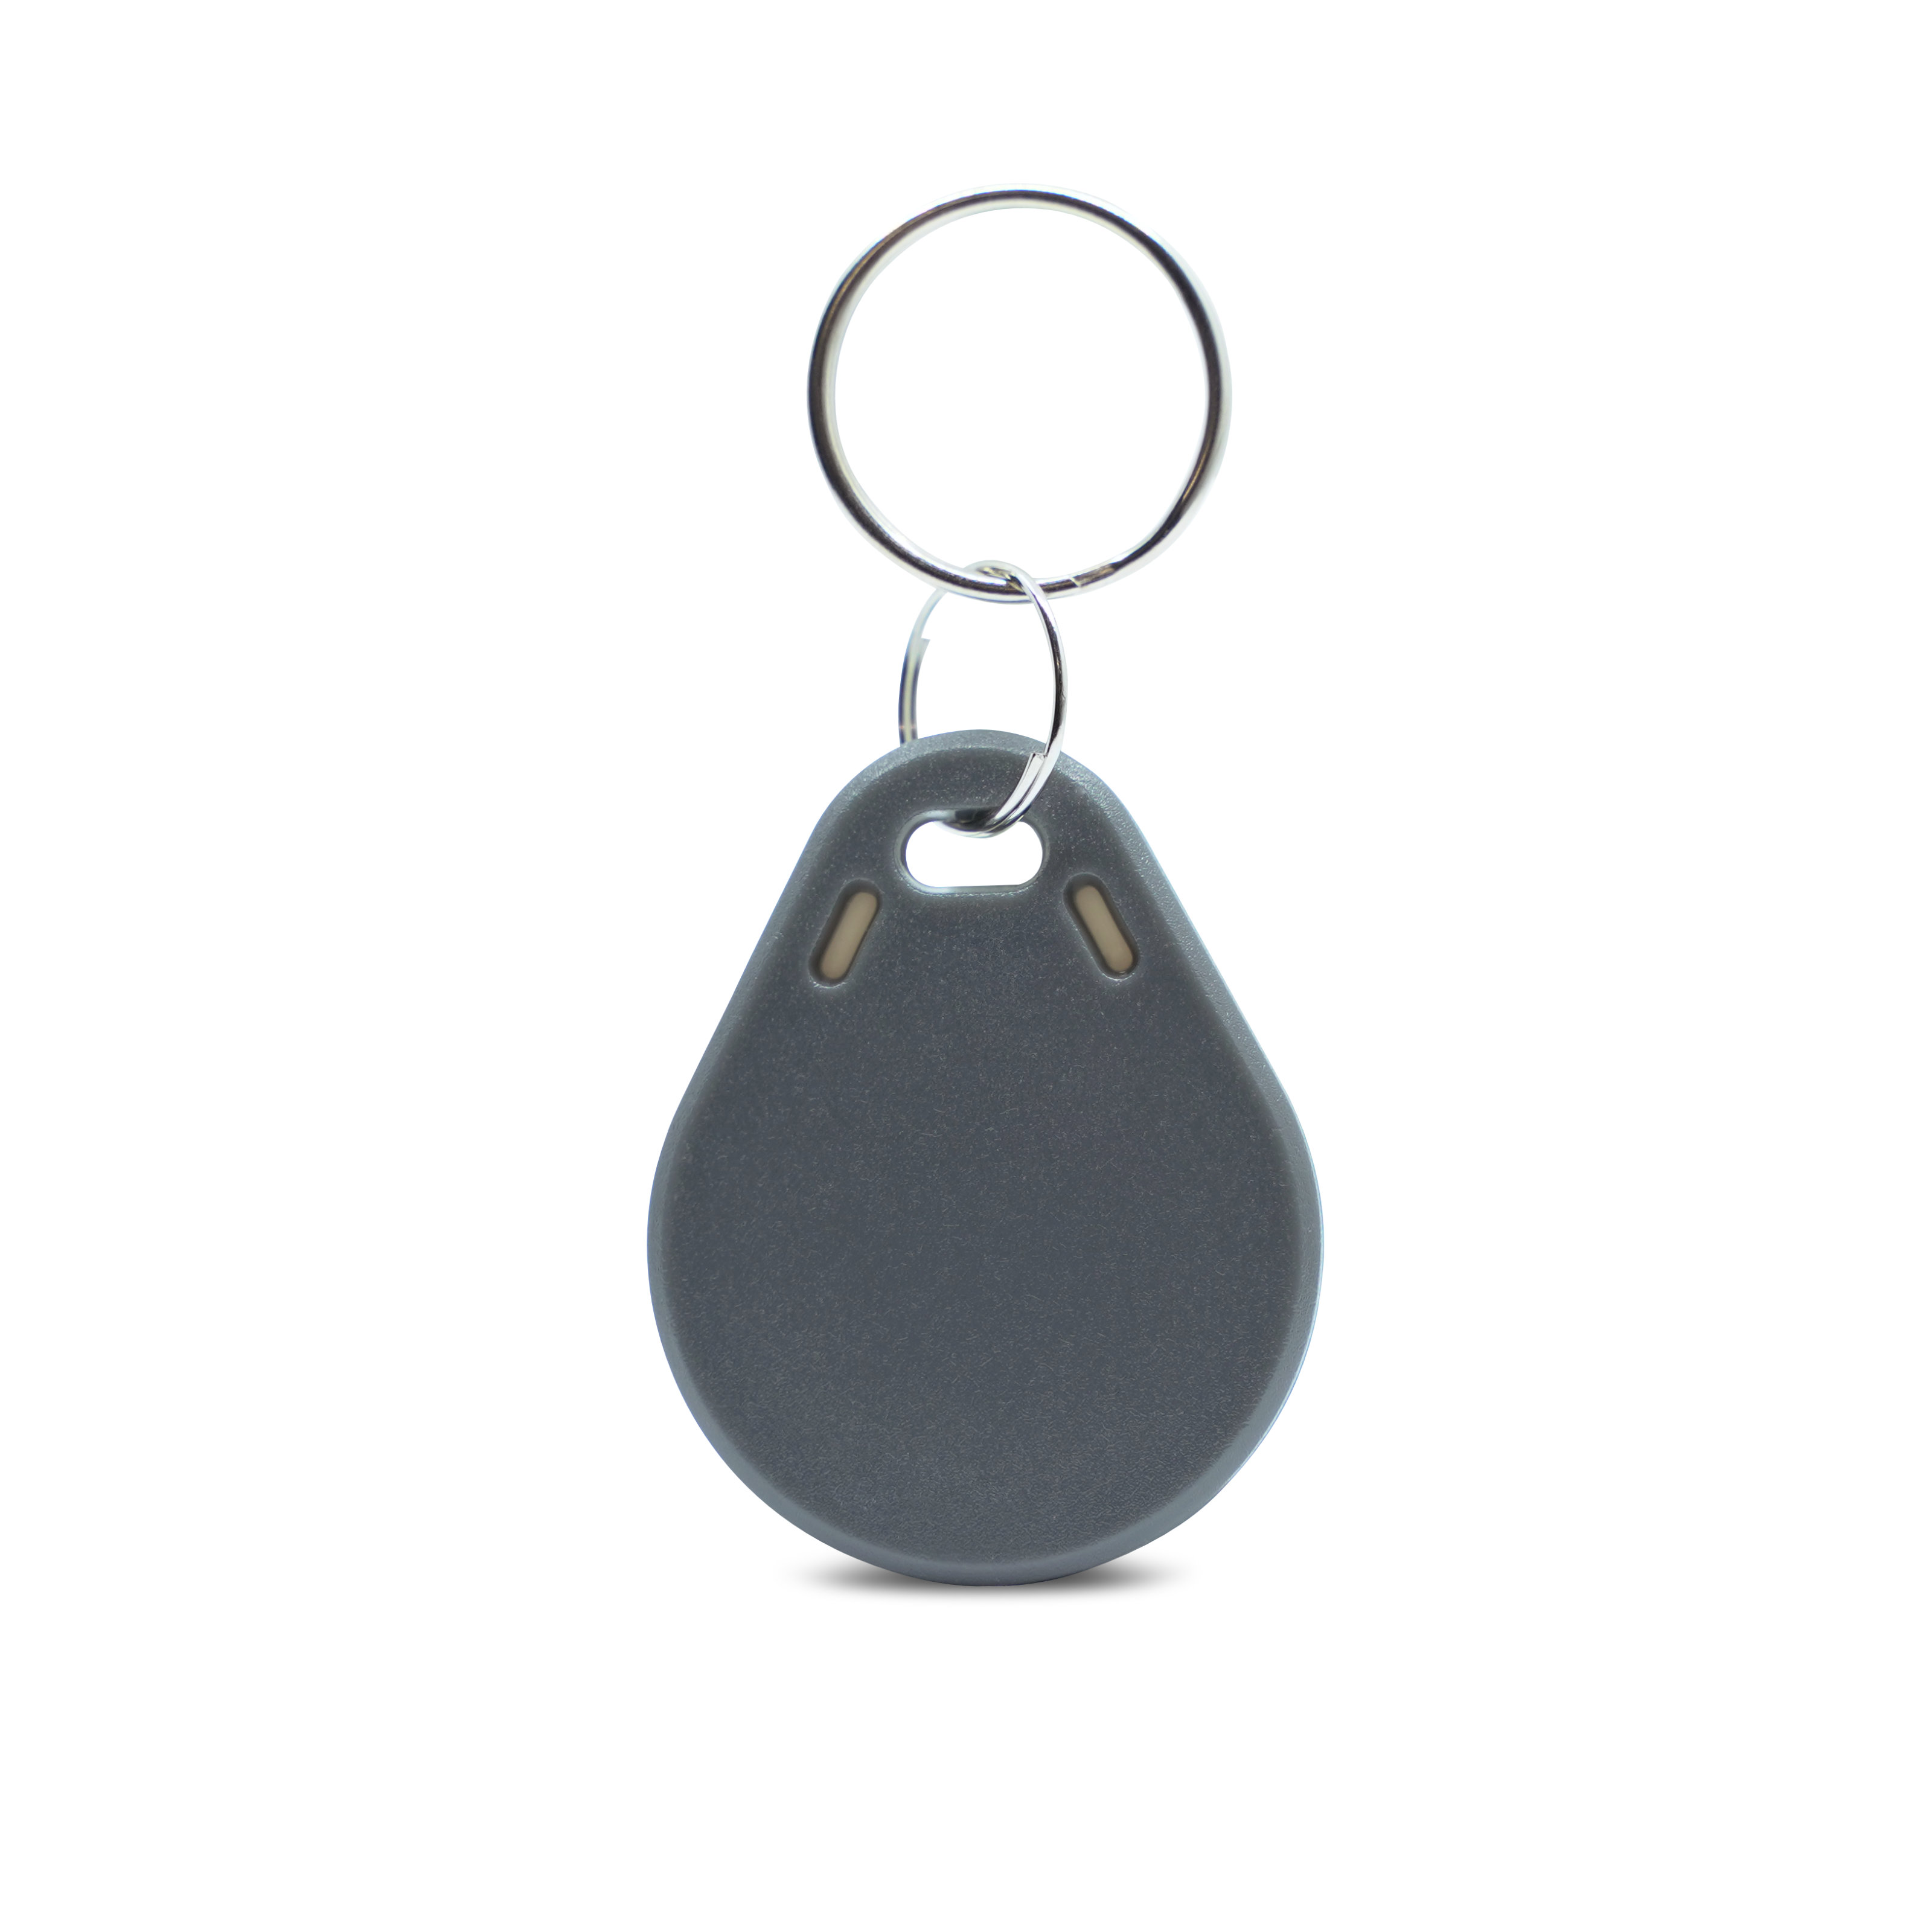 NFC tag ABS - 40 x 32 mm - MIFARE Classic 1k - 1024 Byte - grey